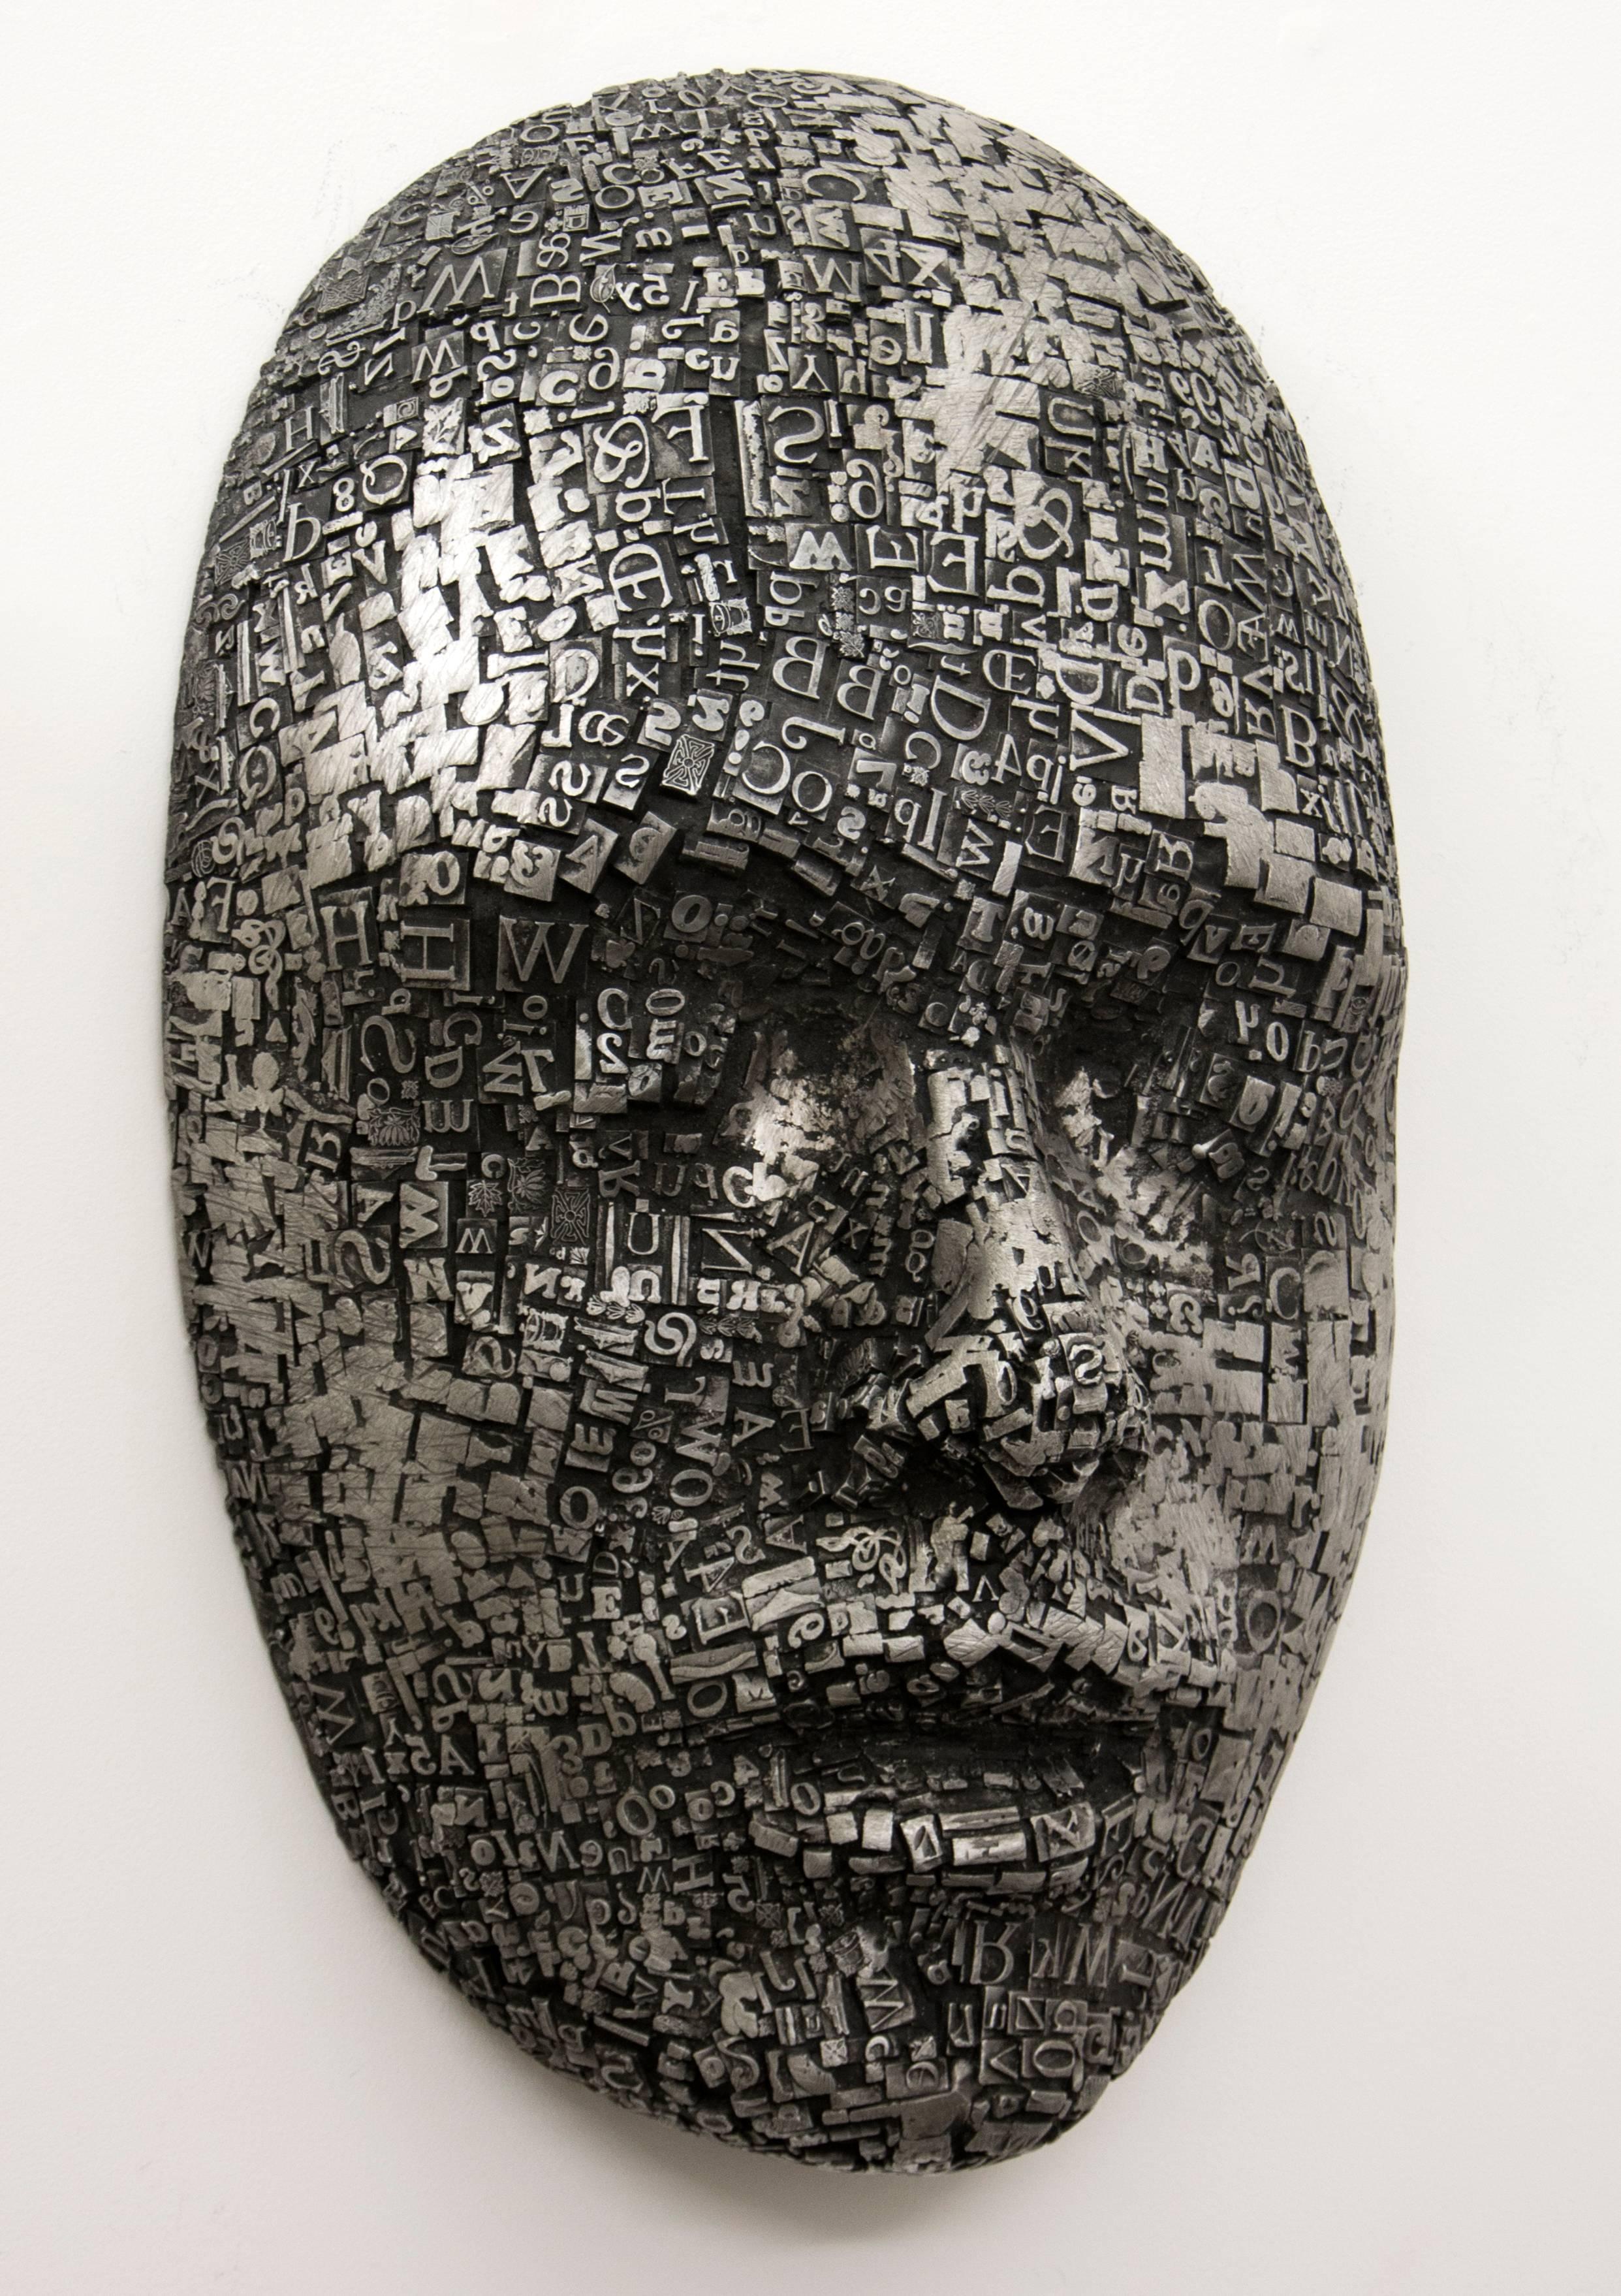 Dale Dunning Figurative Sculpture - Palimpsest 5/7 - abstract, repurposed metal, gothic, figurative wall sculpture